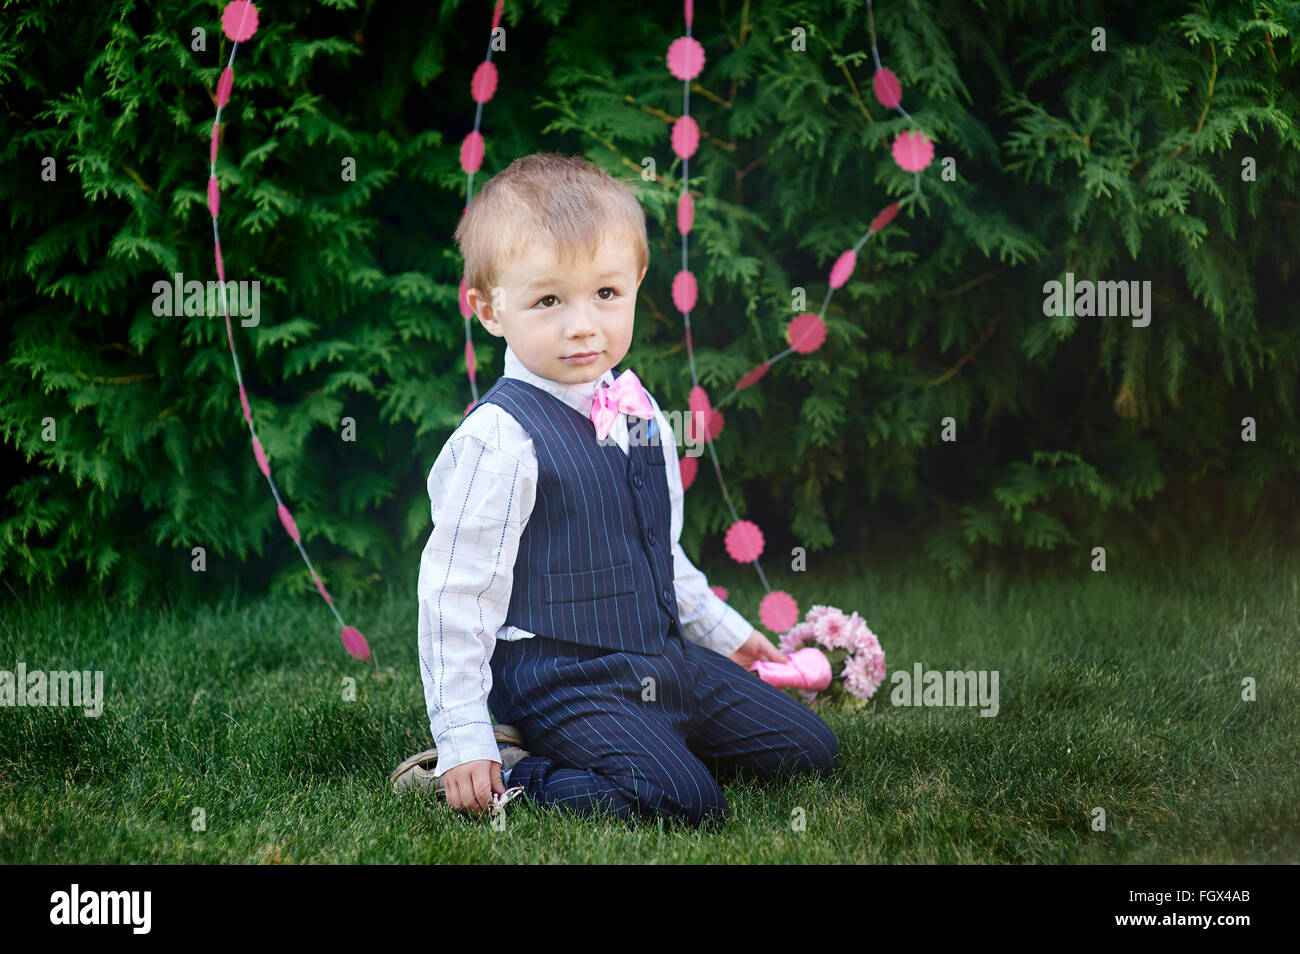 little boy in a suit with a bouquet sitting on the grass Stock Photo